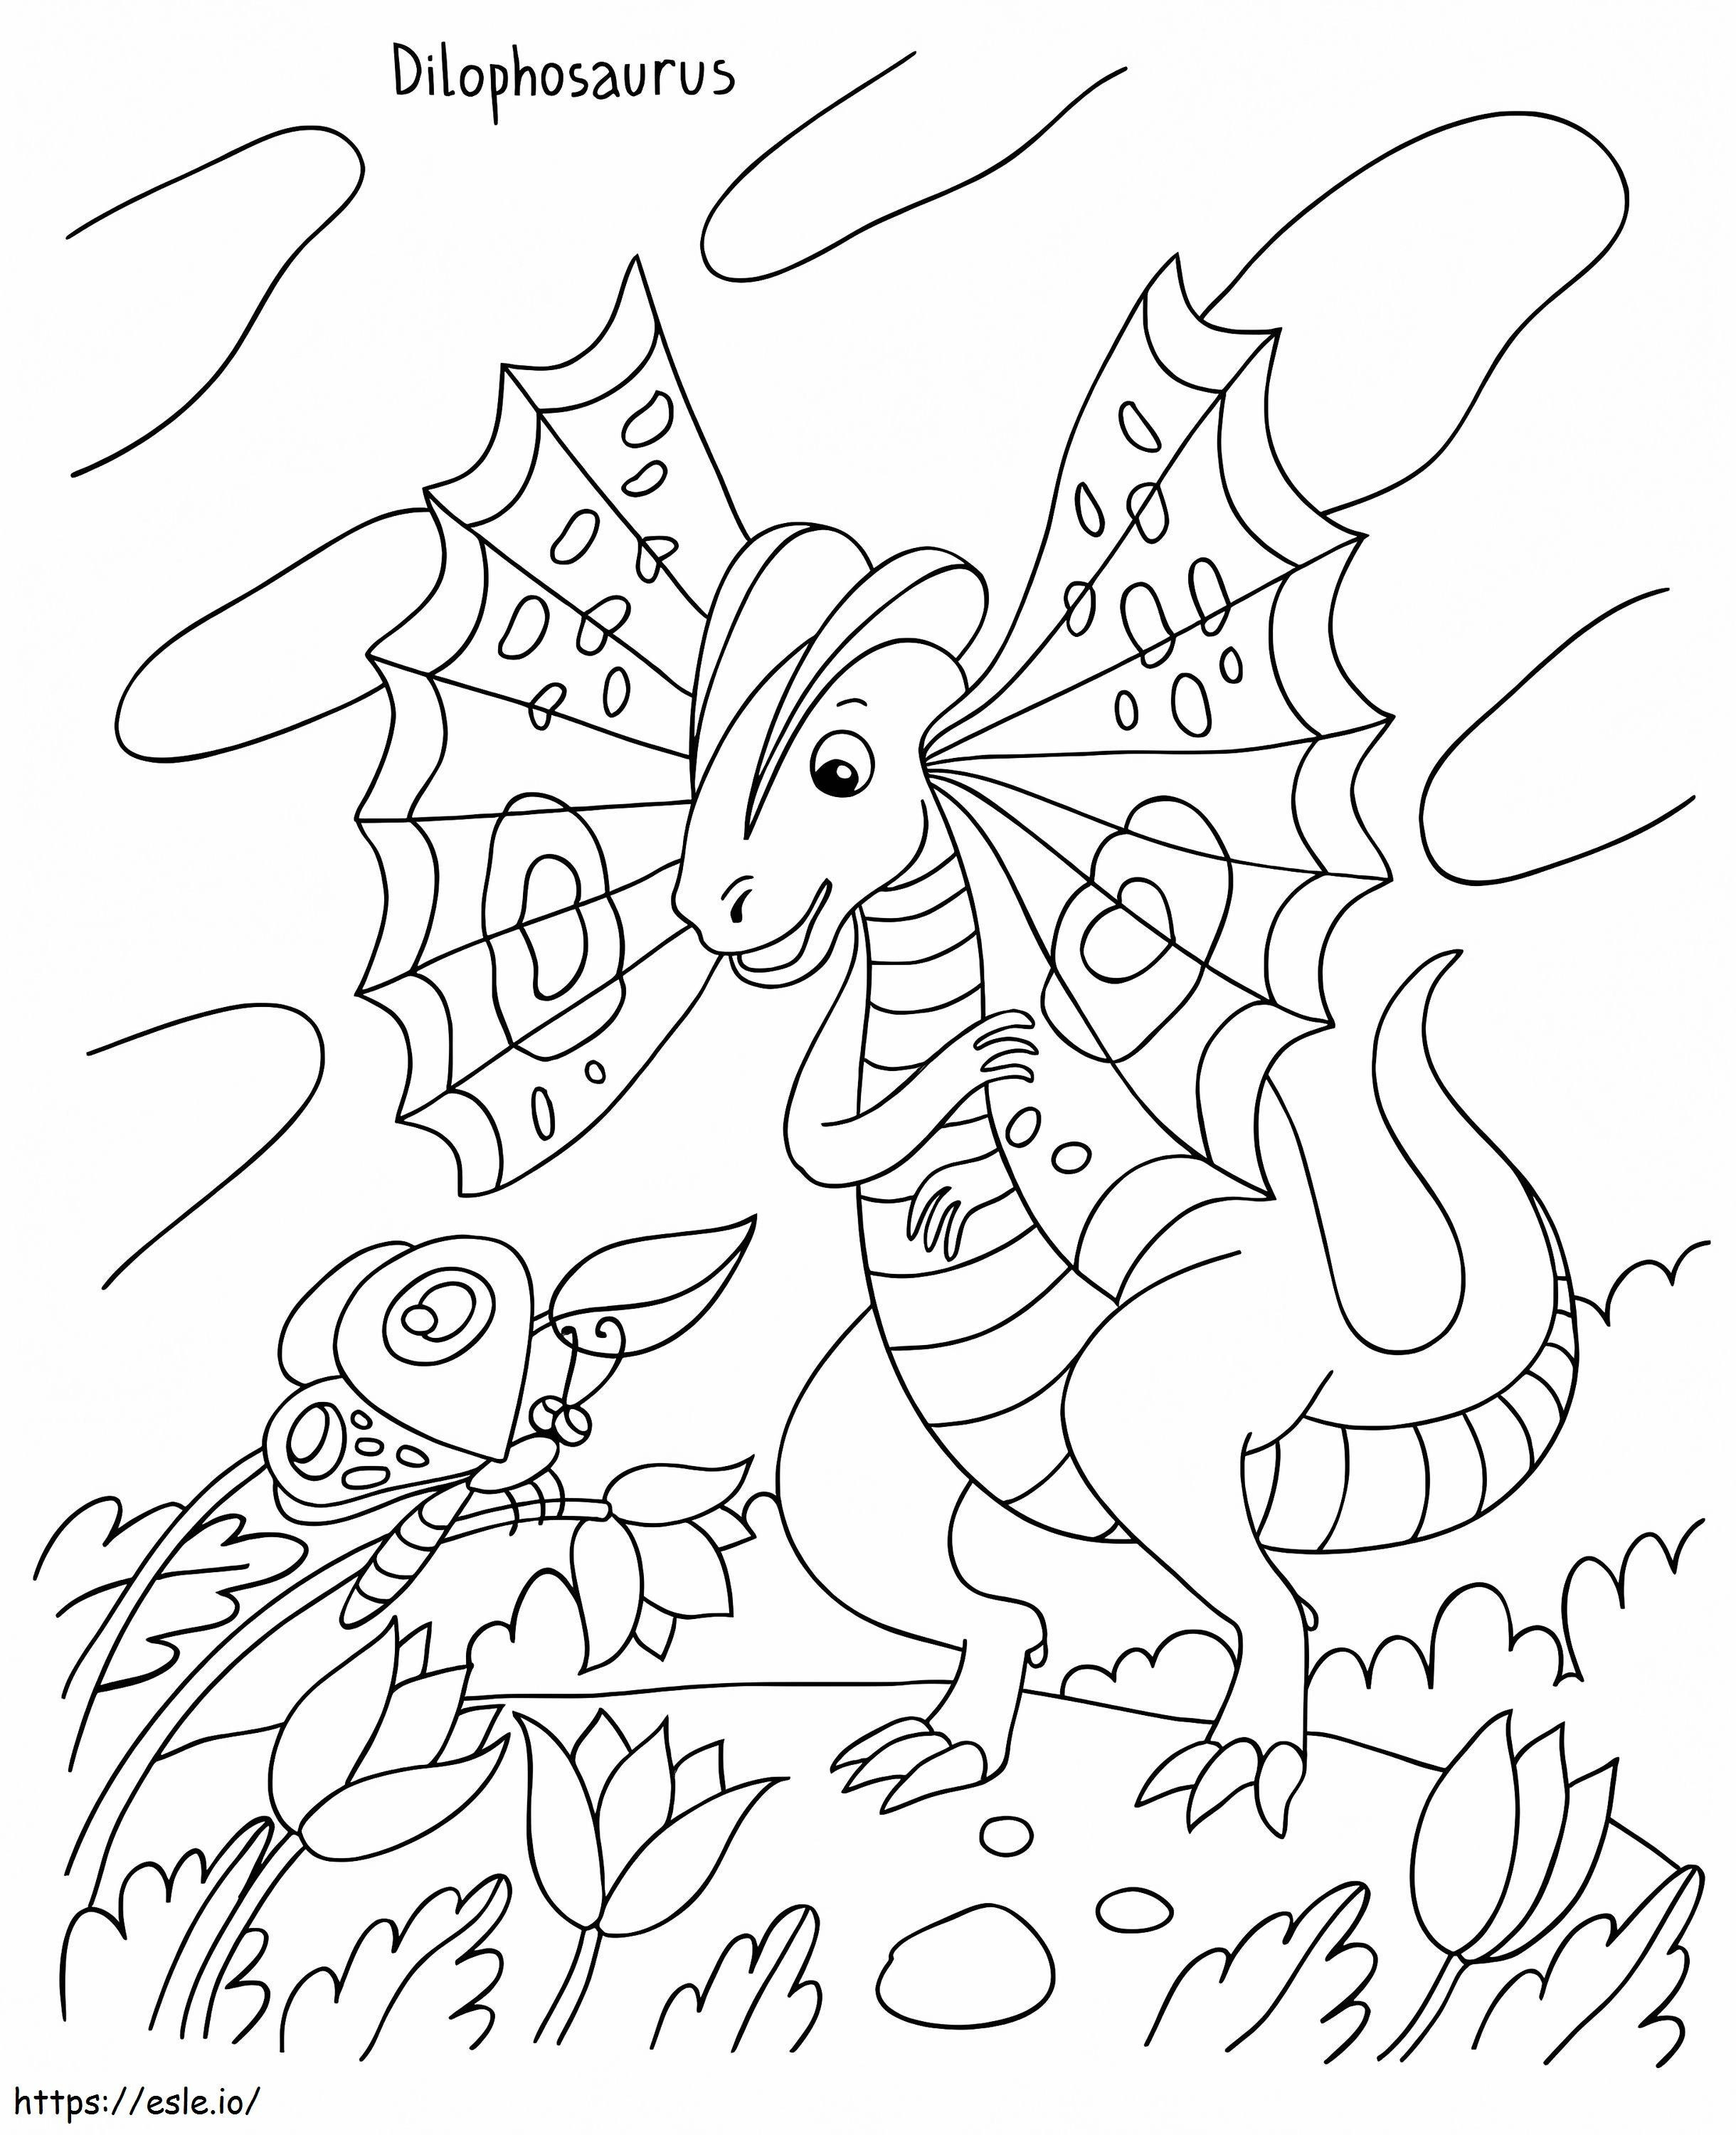 Lovely Dilophosaurus coloring page